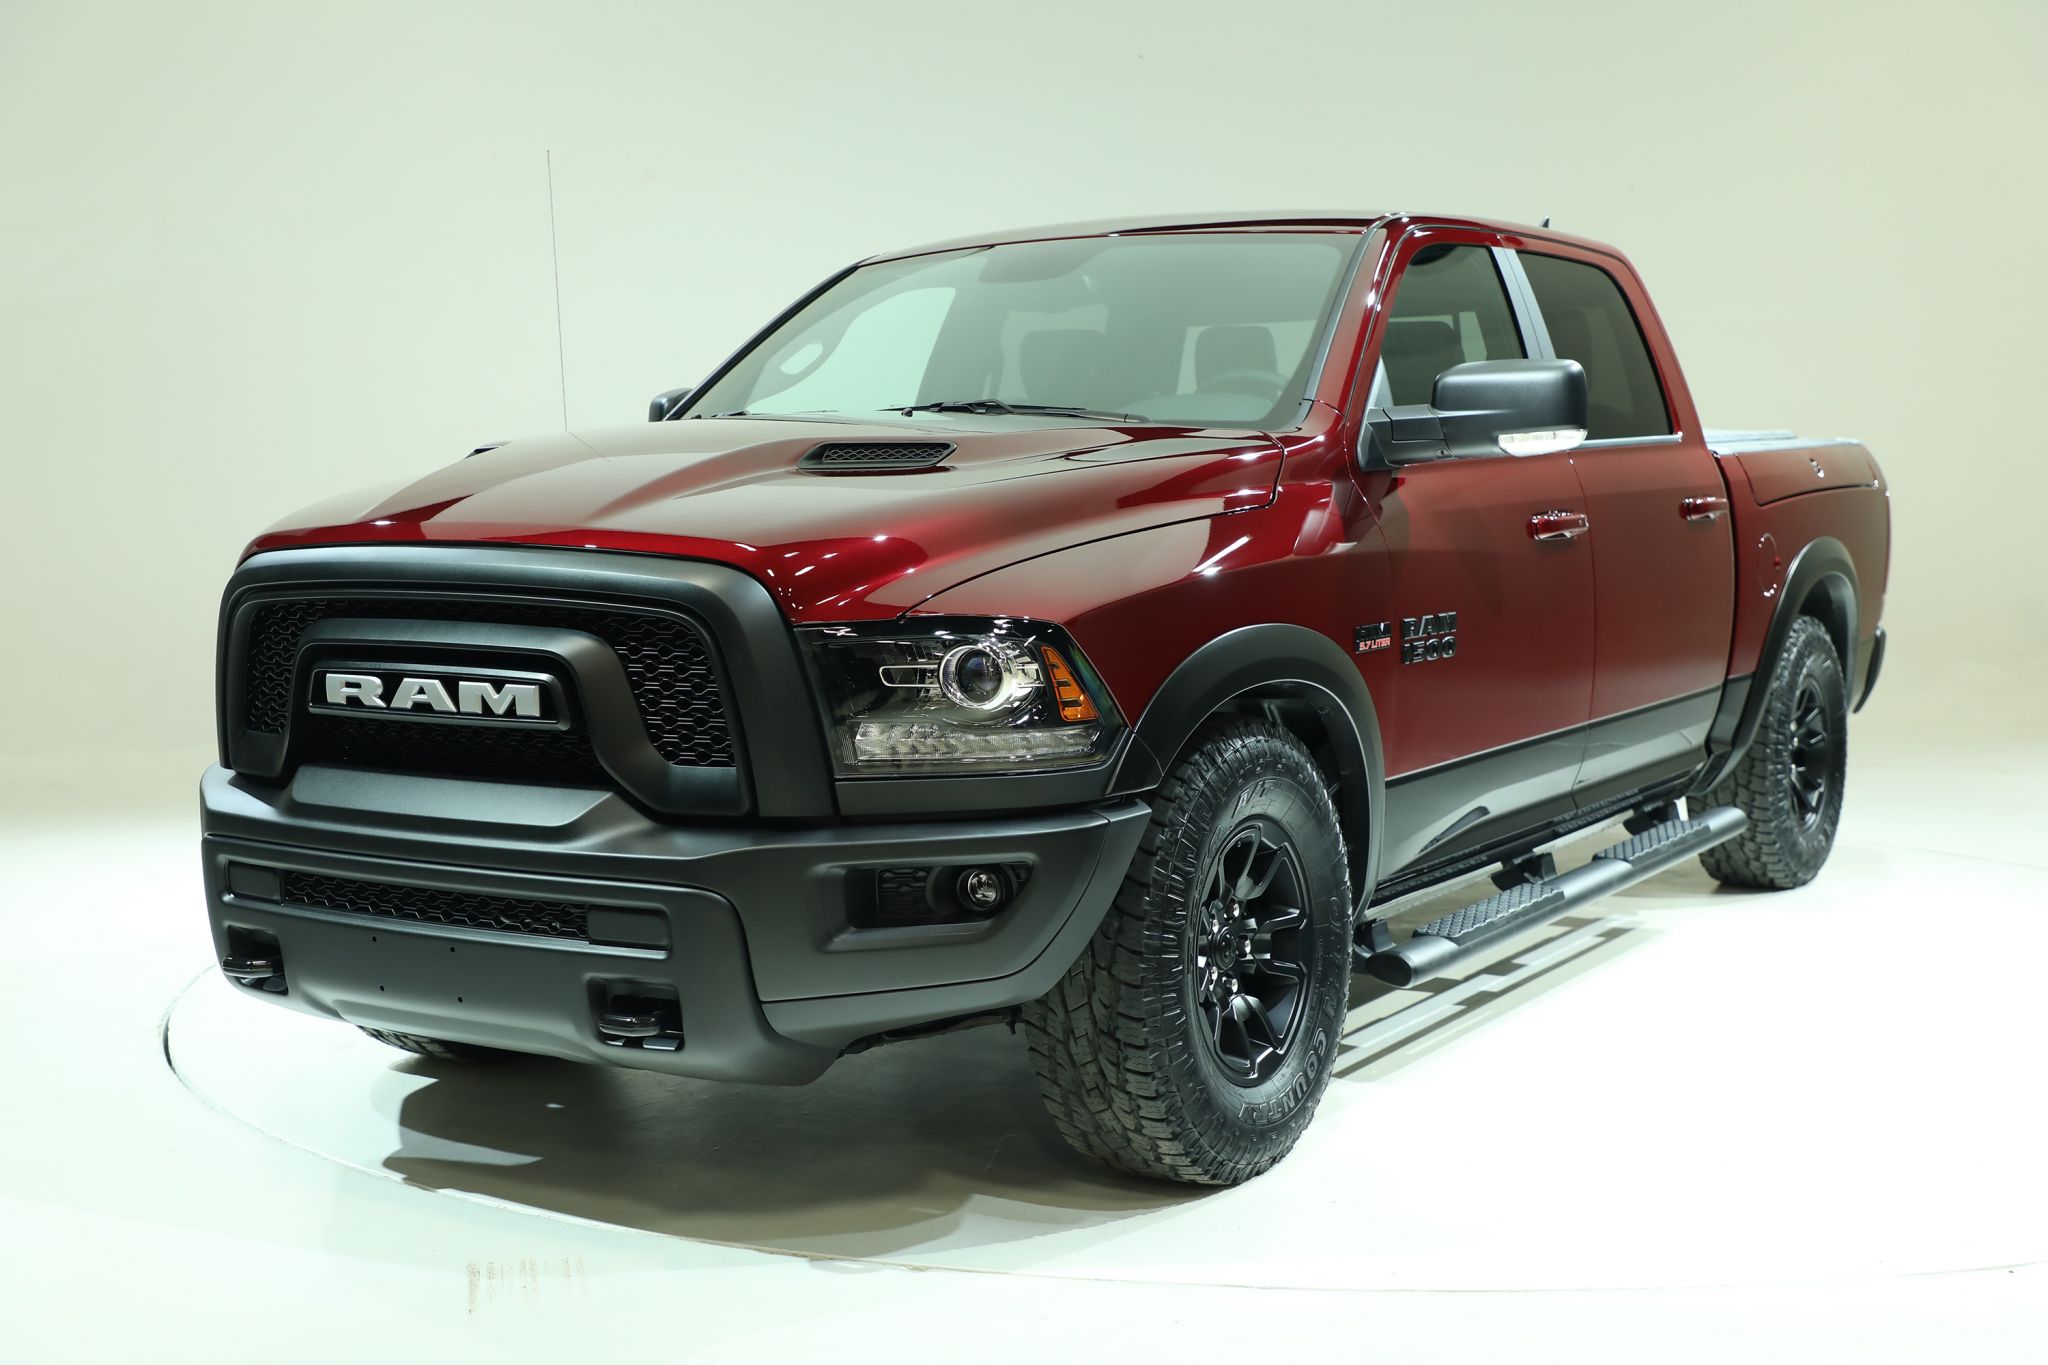 Ram Truck saves some surprises for the 2017 Houston Auto Show.